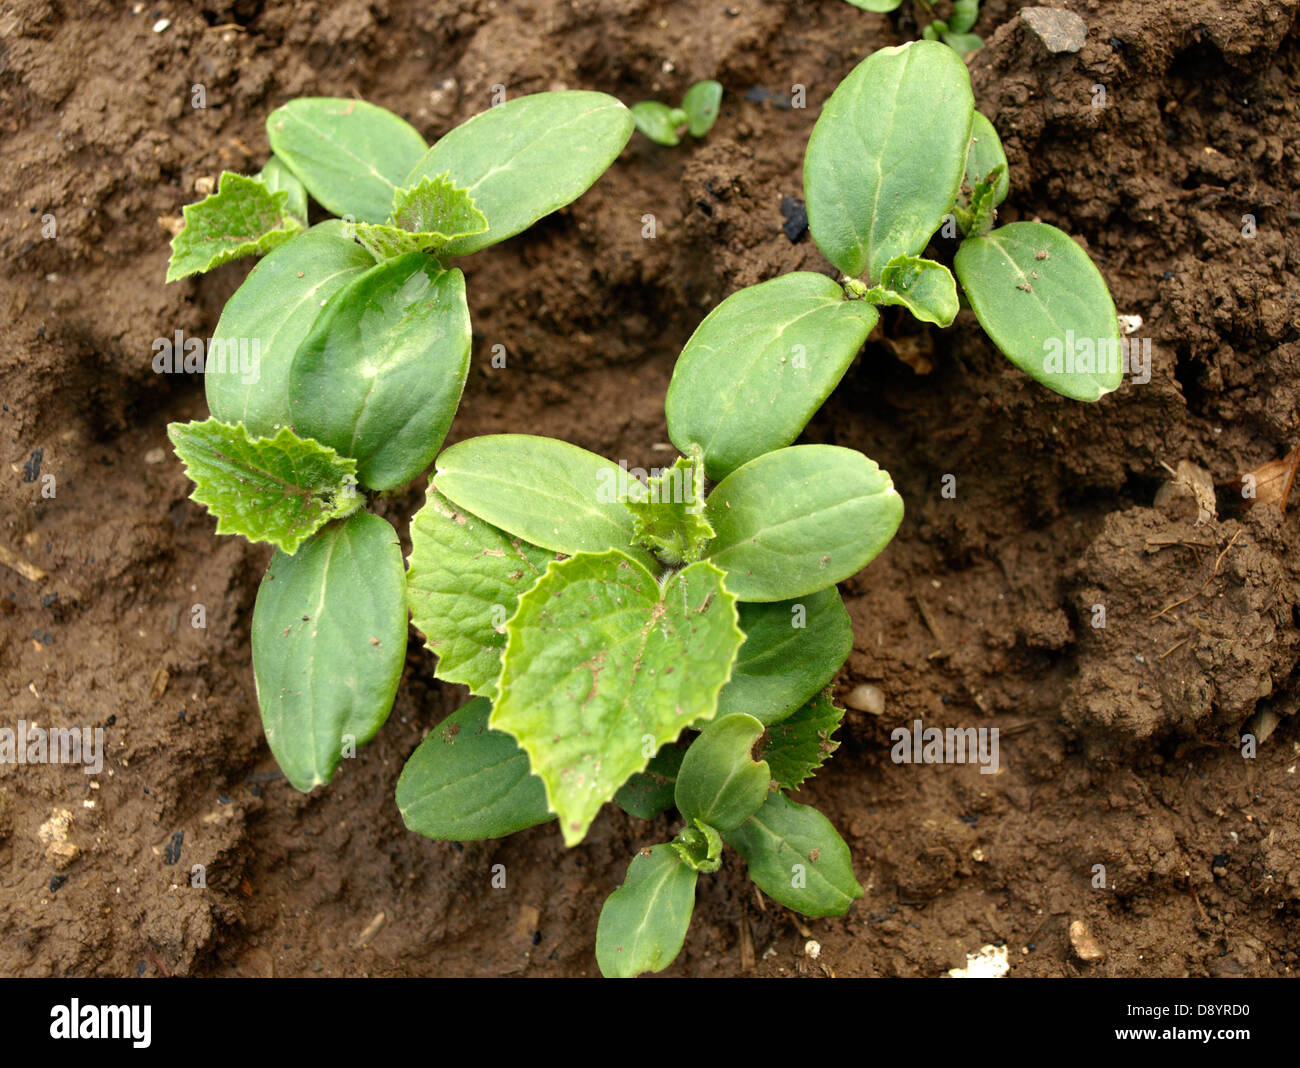 The cucumber (Cucumis sativus) plant before bloom, bio, gardening, cucumber cultiviation, young cucumber plants, cotyledons Stock Photo